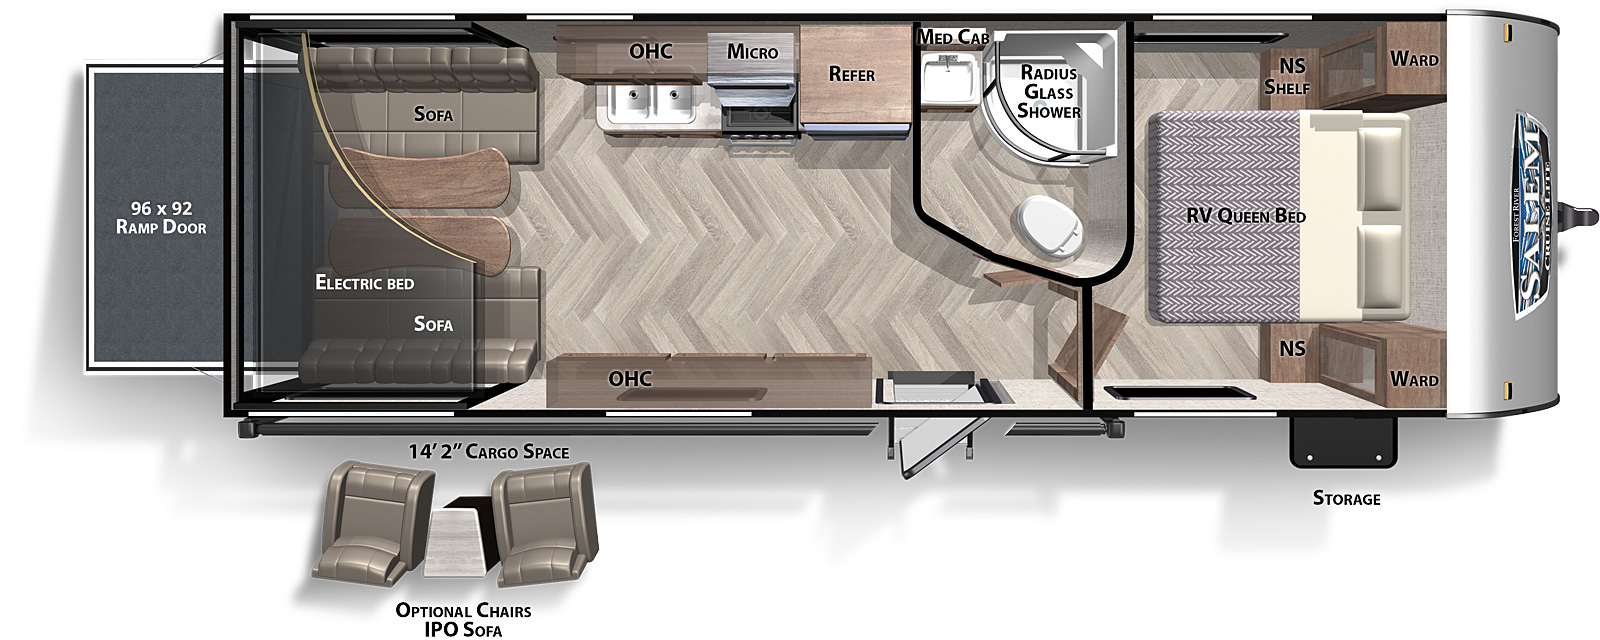 Cruise Lite Northwest 251SSXL floorplan. The 251SSXL has no slide outs and one entry door.